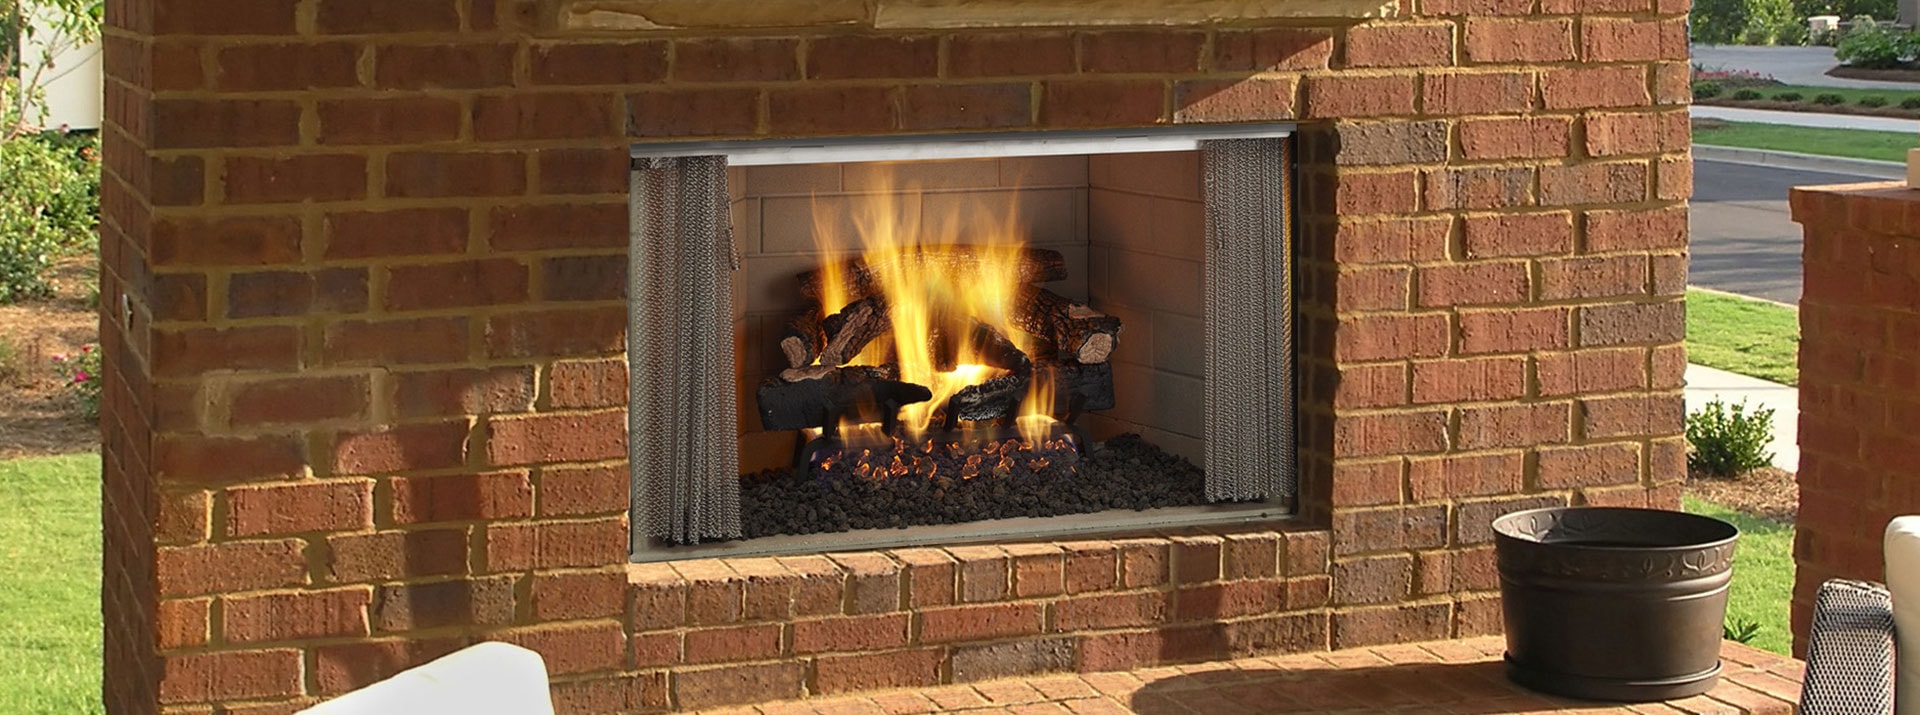 How to Build A Wood Burning Fireplace From Scratch Lovely Villawood Wood Burning Outdoor Fireplace